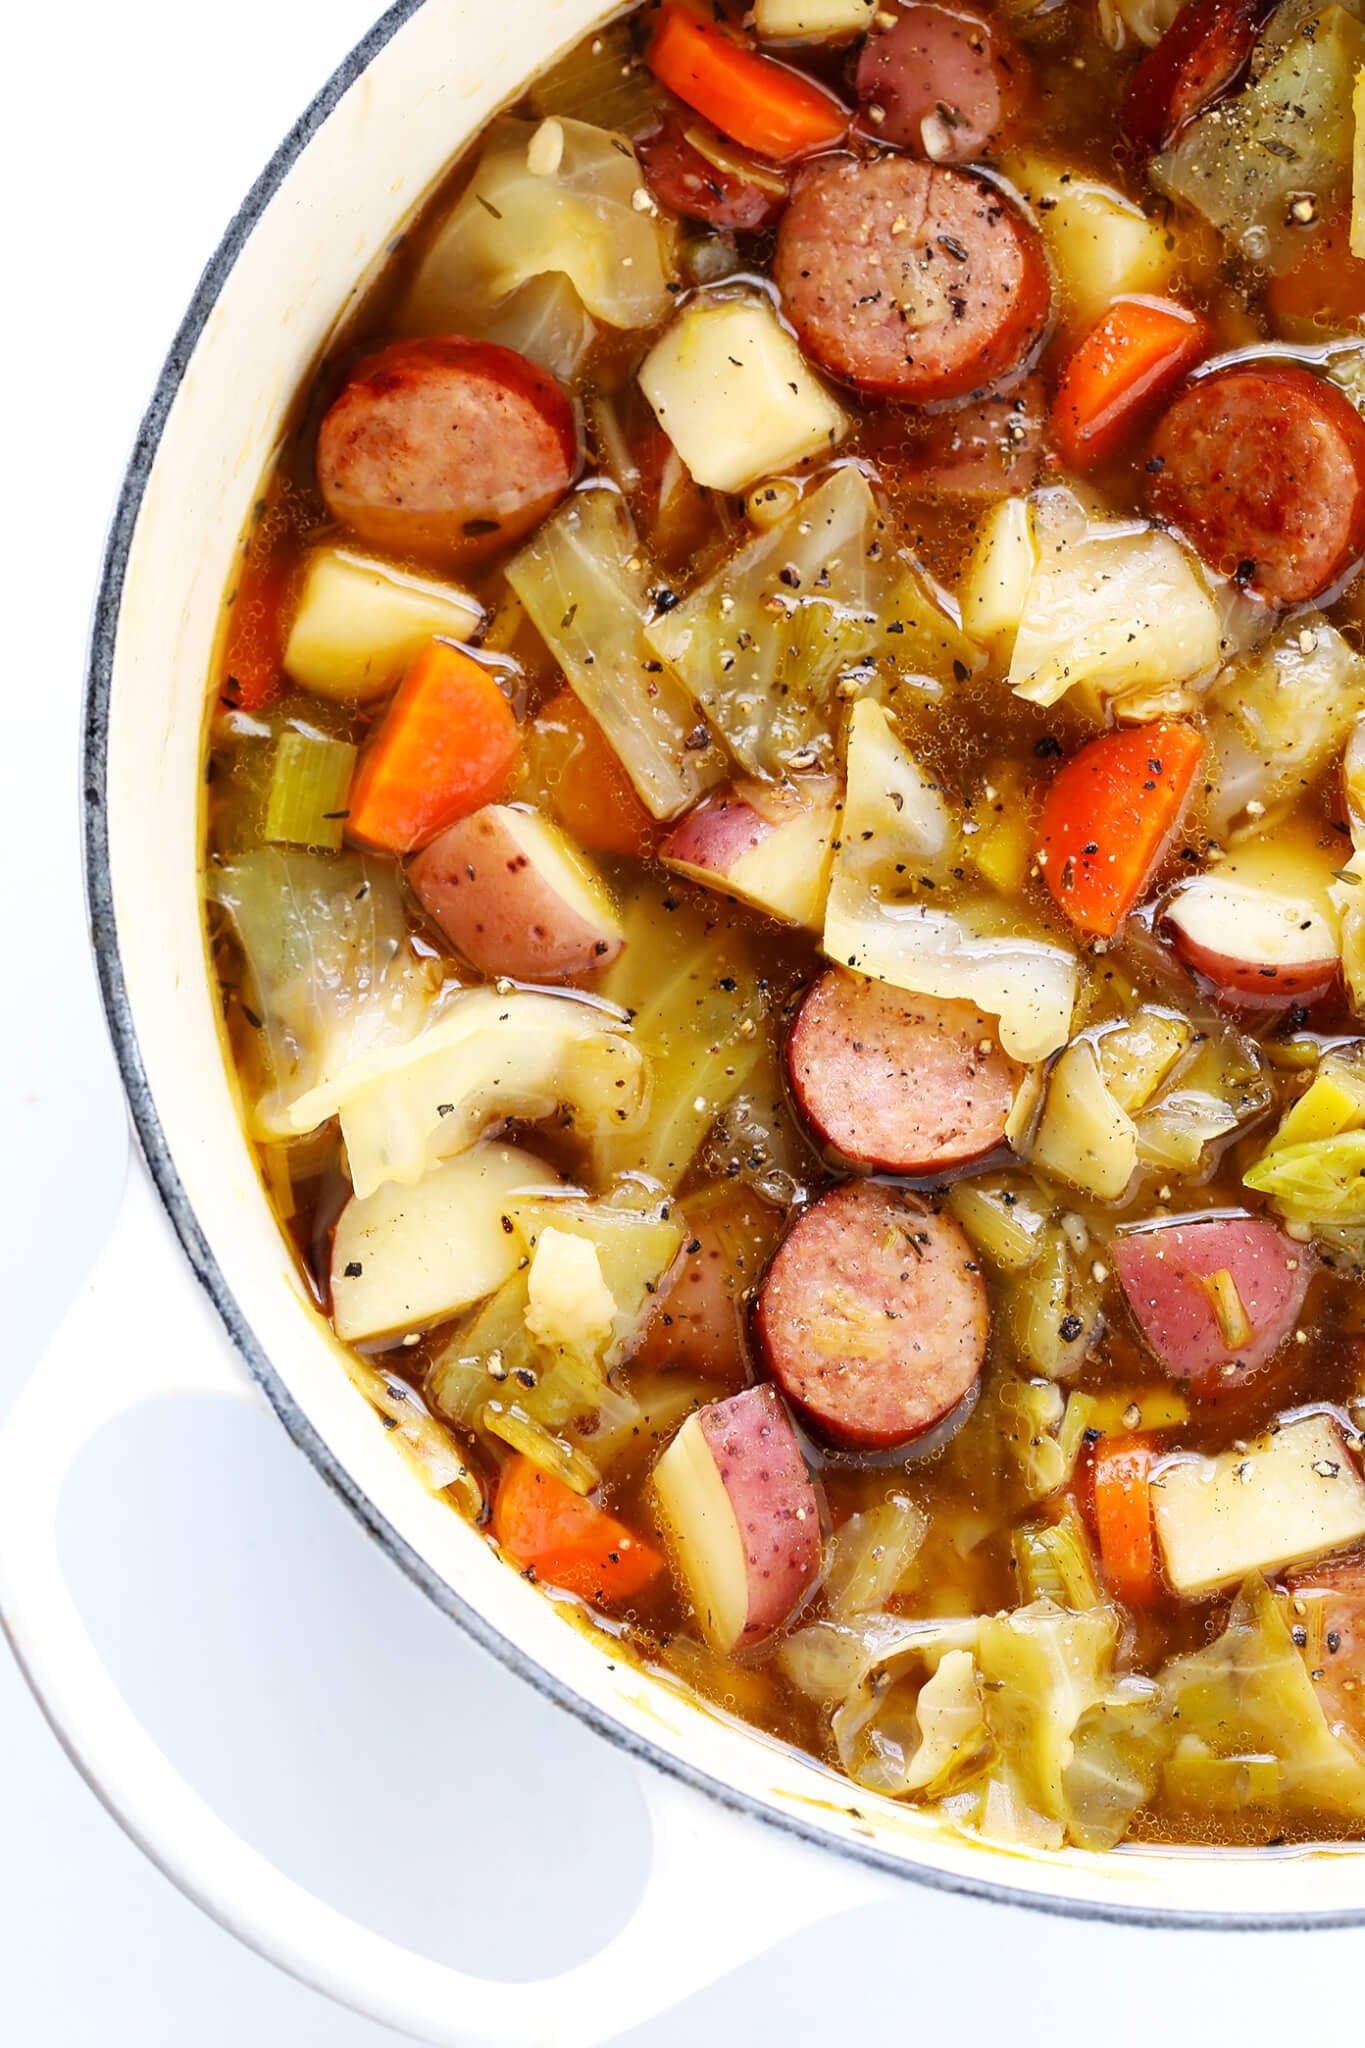 This Cabbage, Sausage and Potato Soup recipe is hearty and comforting, easy to make, and so savory and delicious. My kind of cabbage soup! | Gimme Some Oven #glutenfree #cabbage #soup #recipe